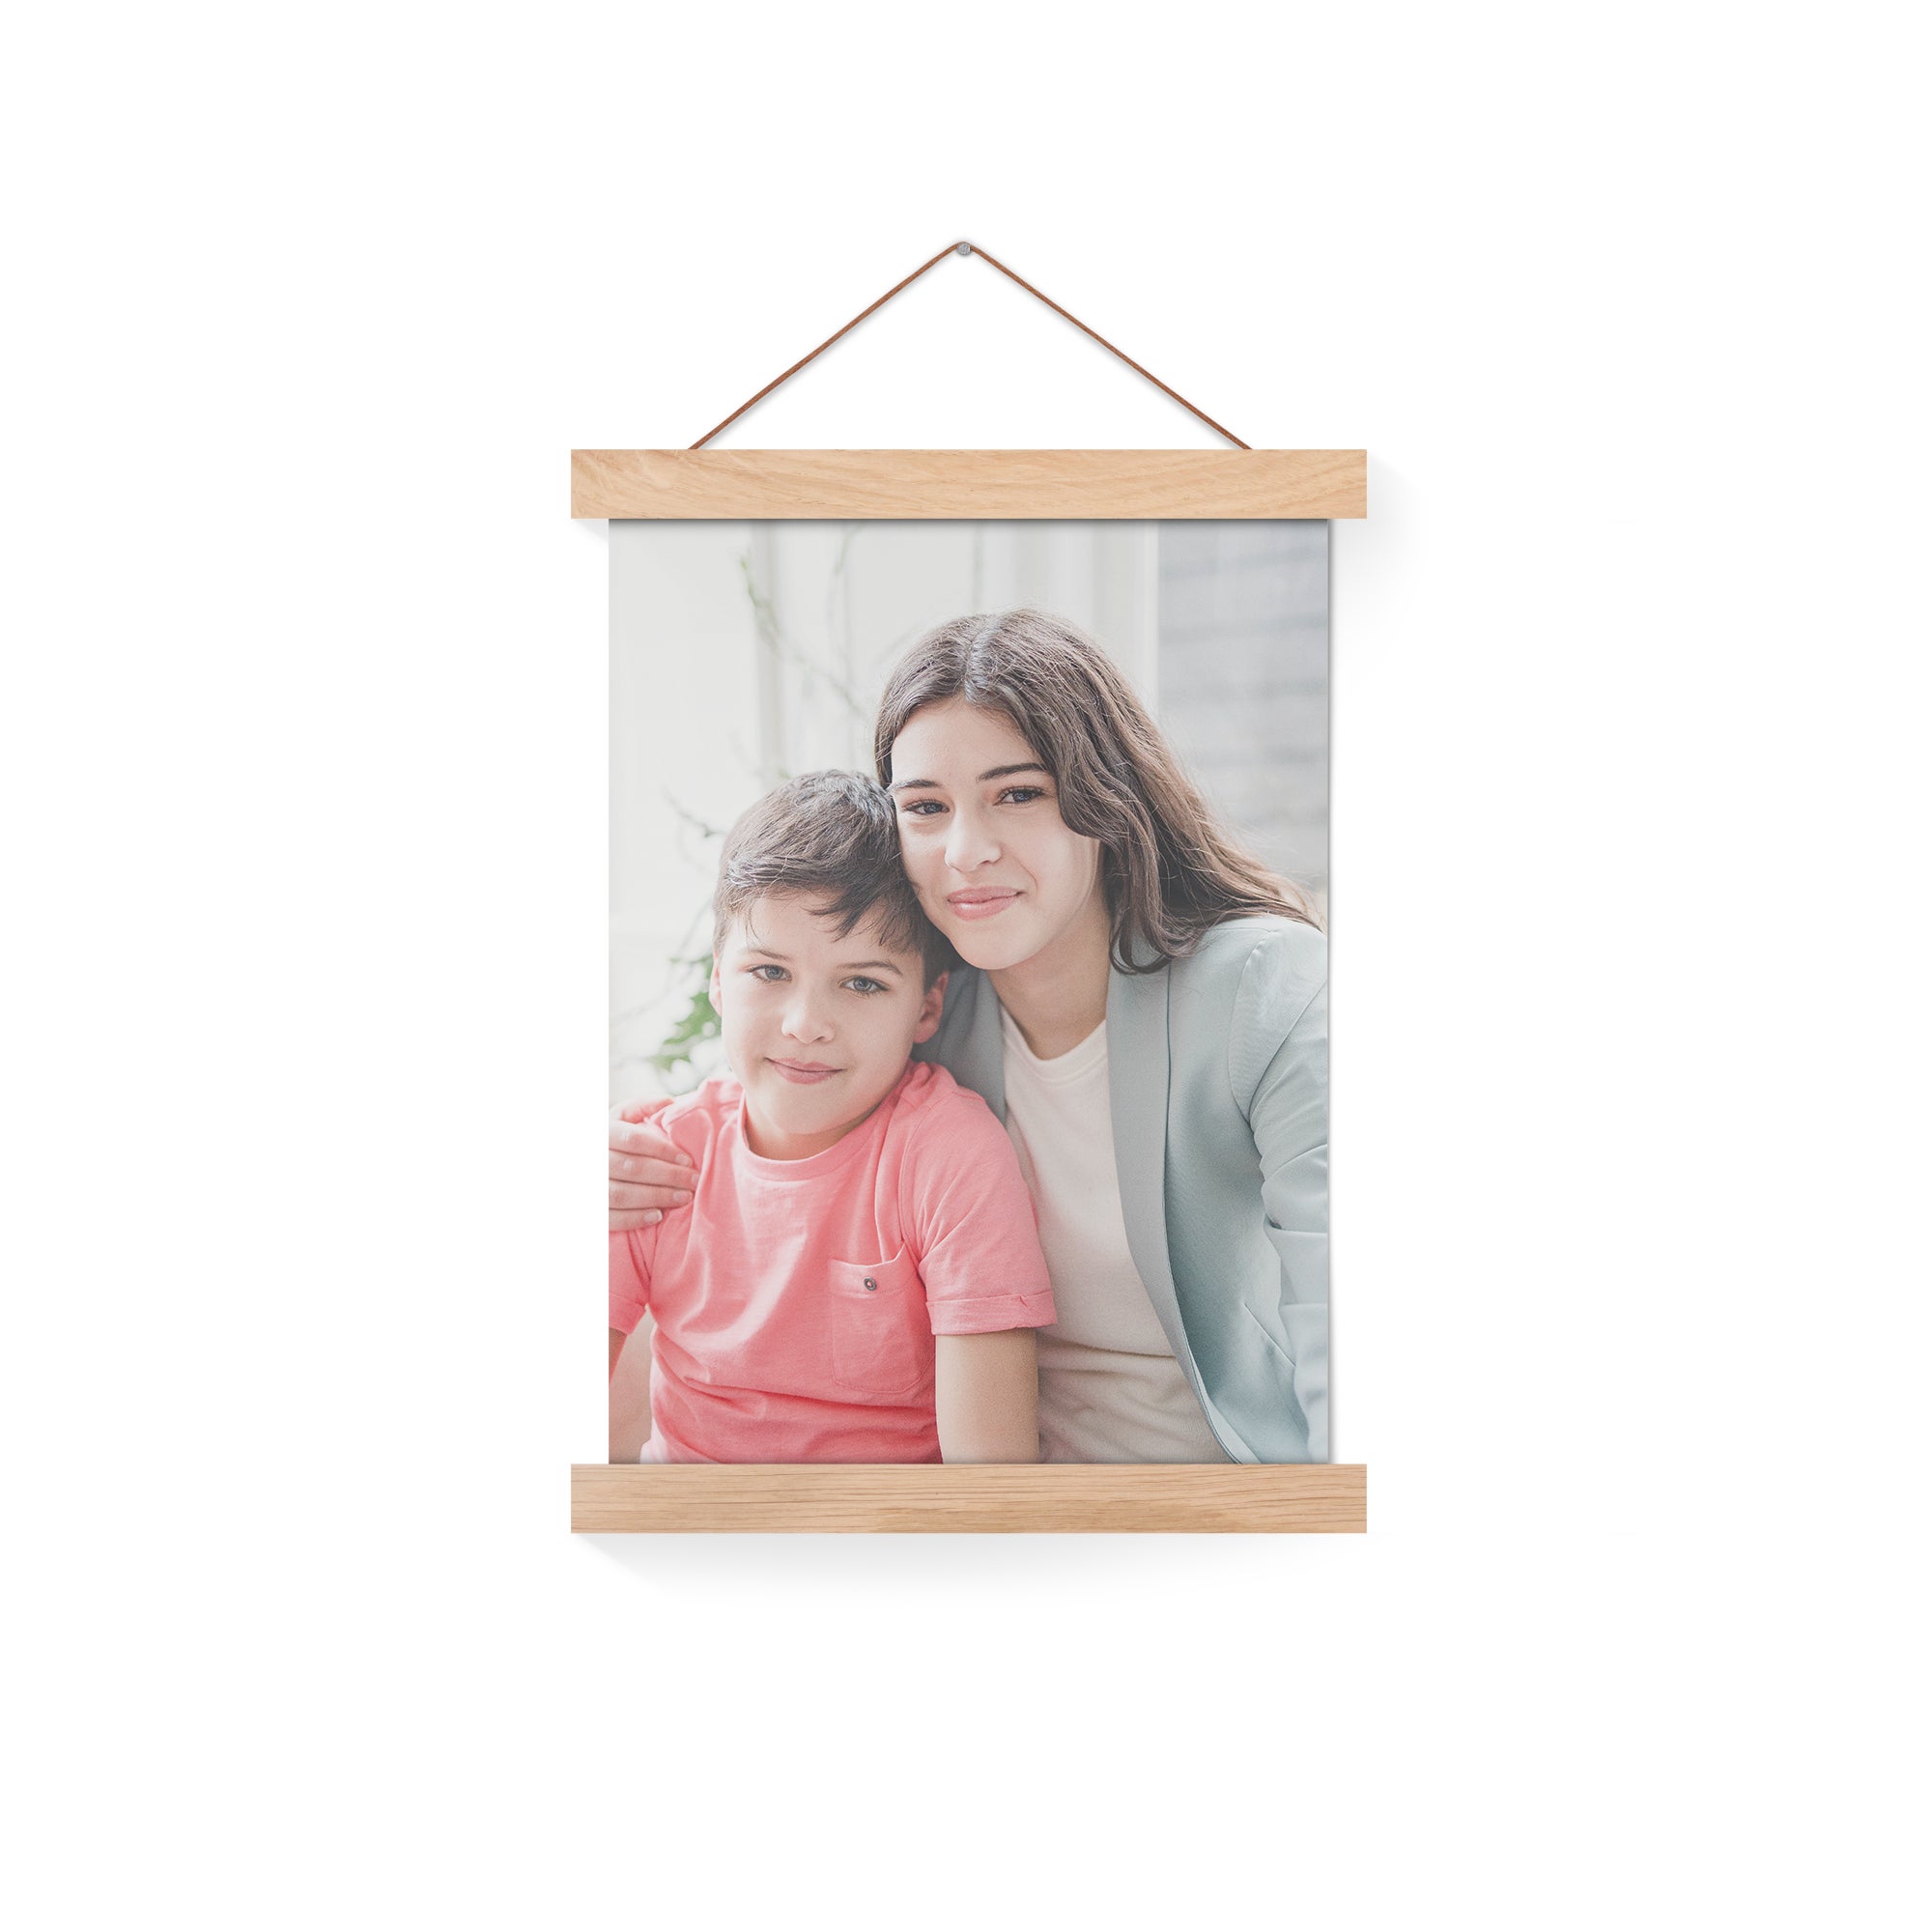 Personalised poster with wooden hanger - 20x30